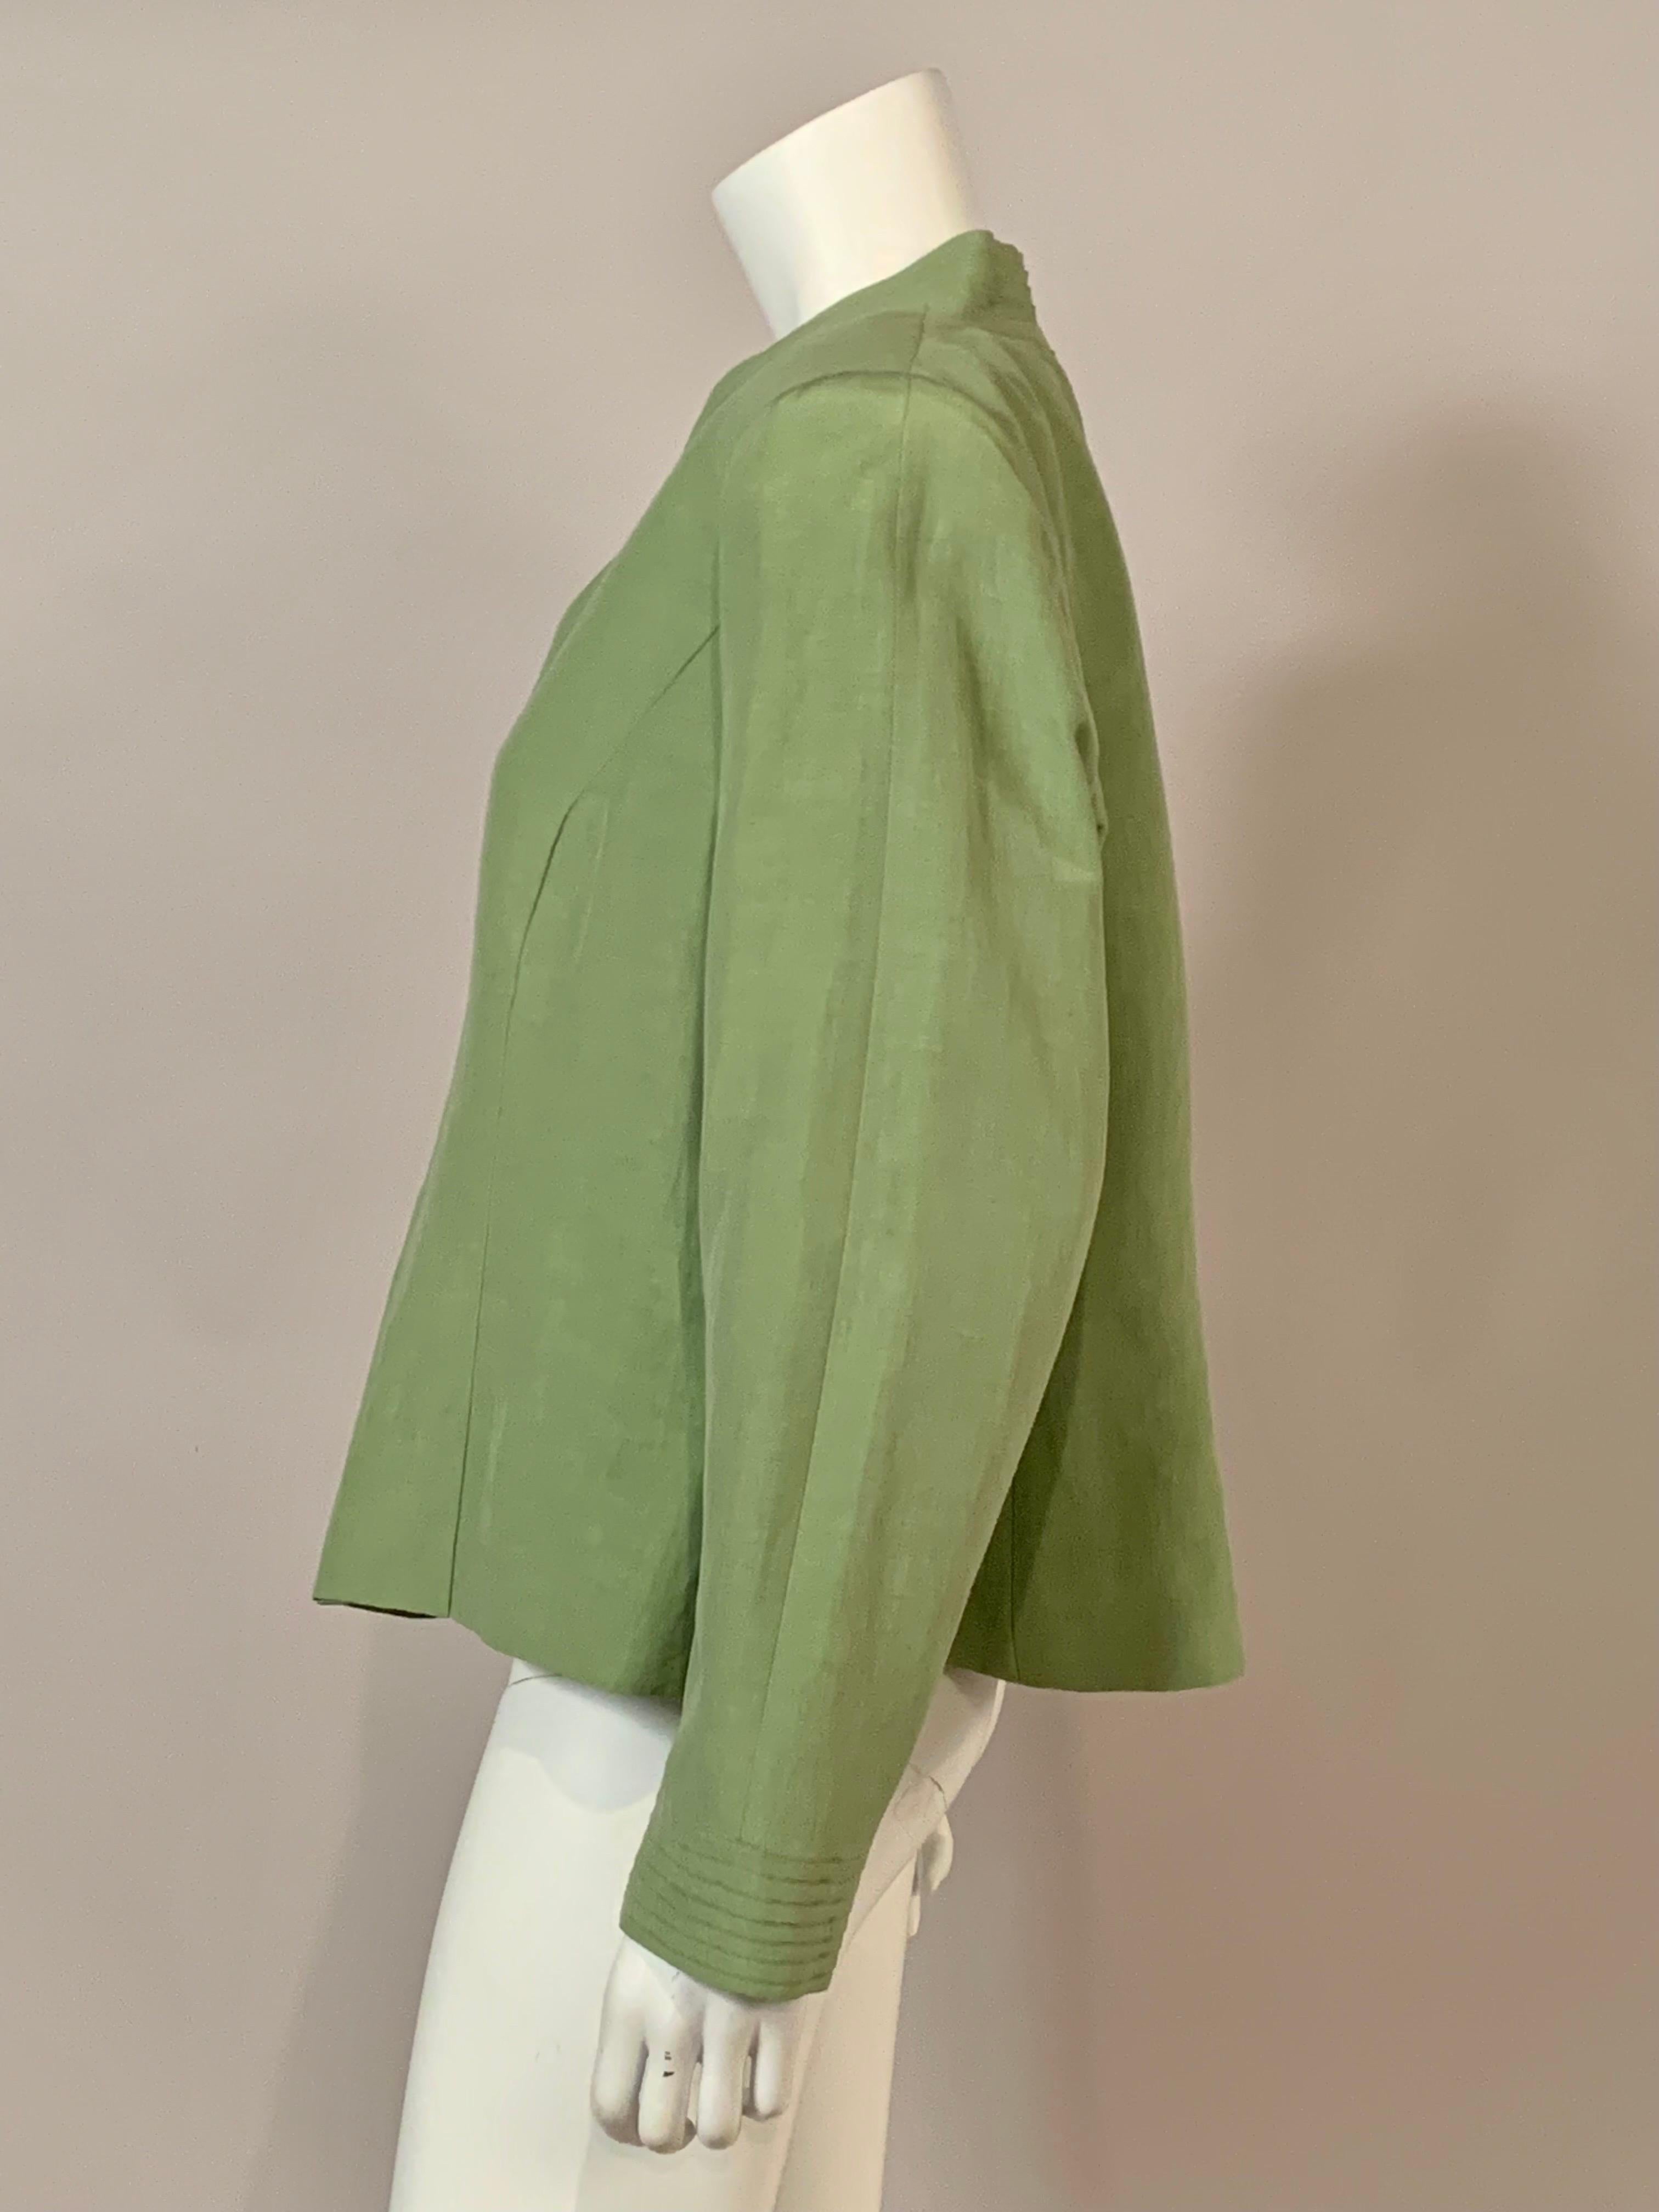 Armani Green Linen and Silk Blend Jacket with Pleated Collar and Cuffs For Sale 3